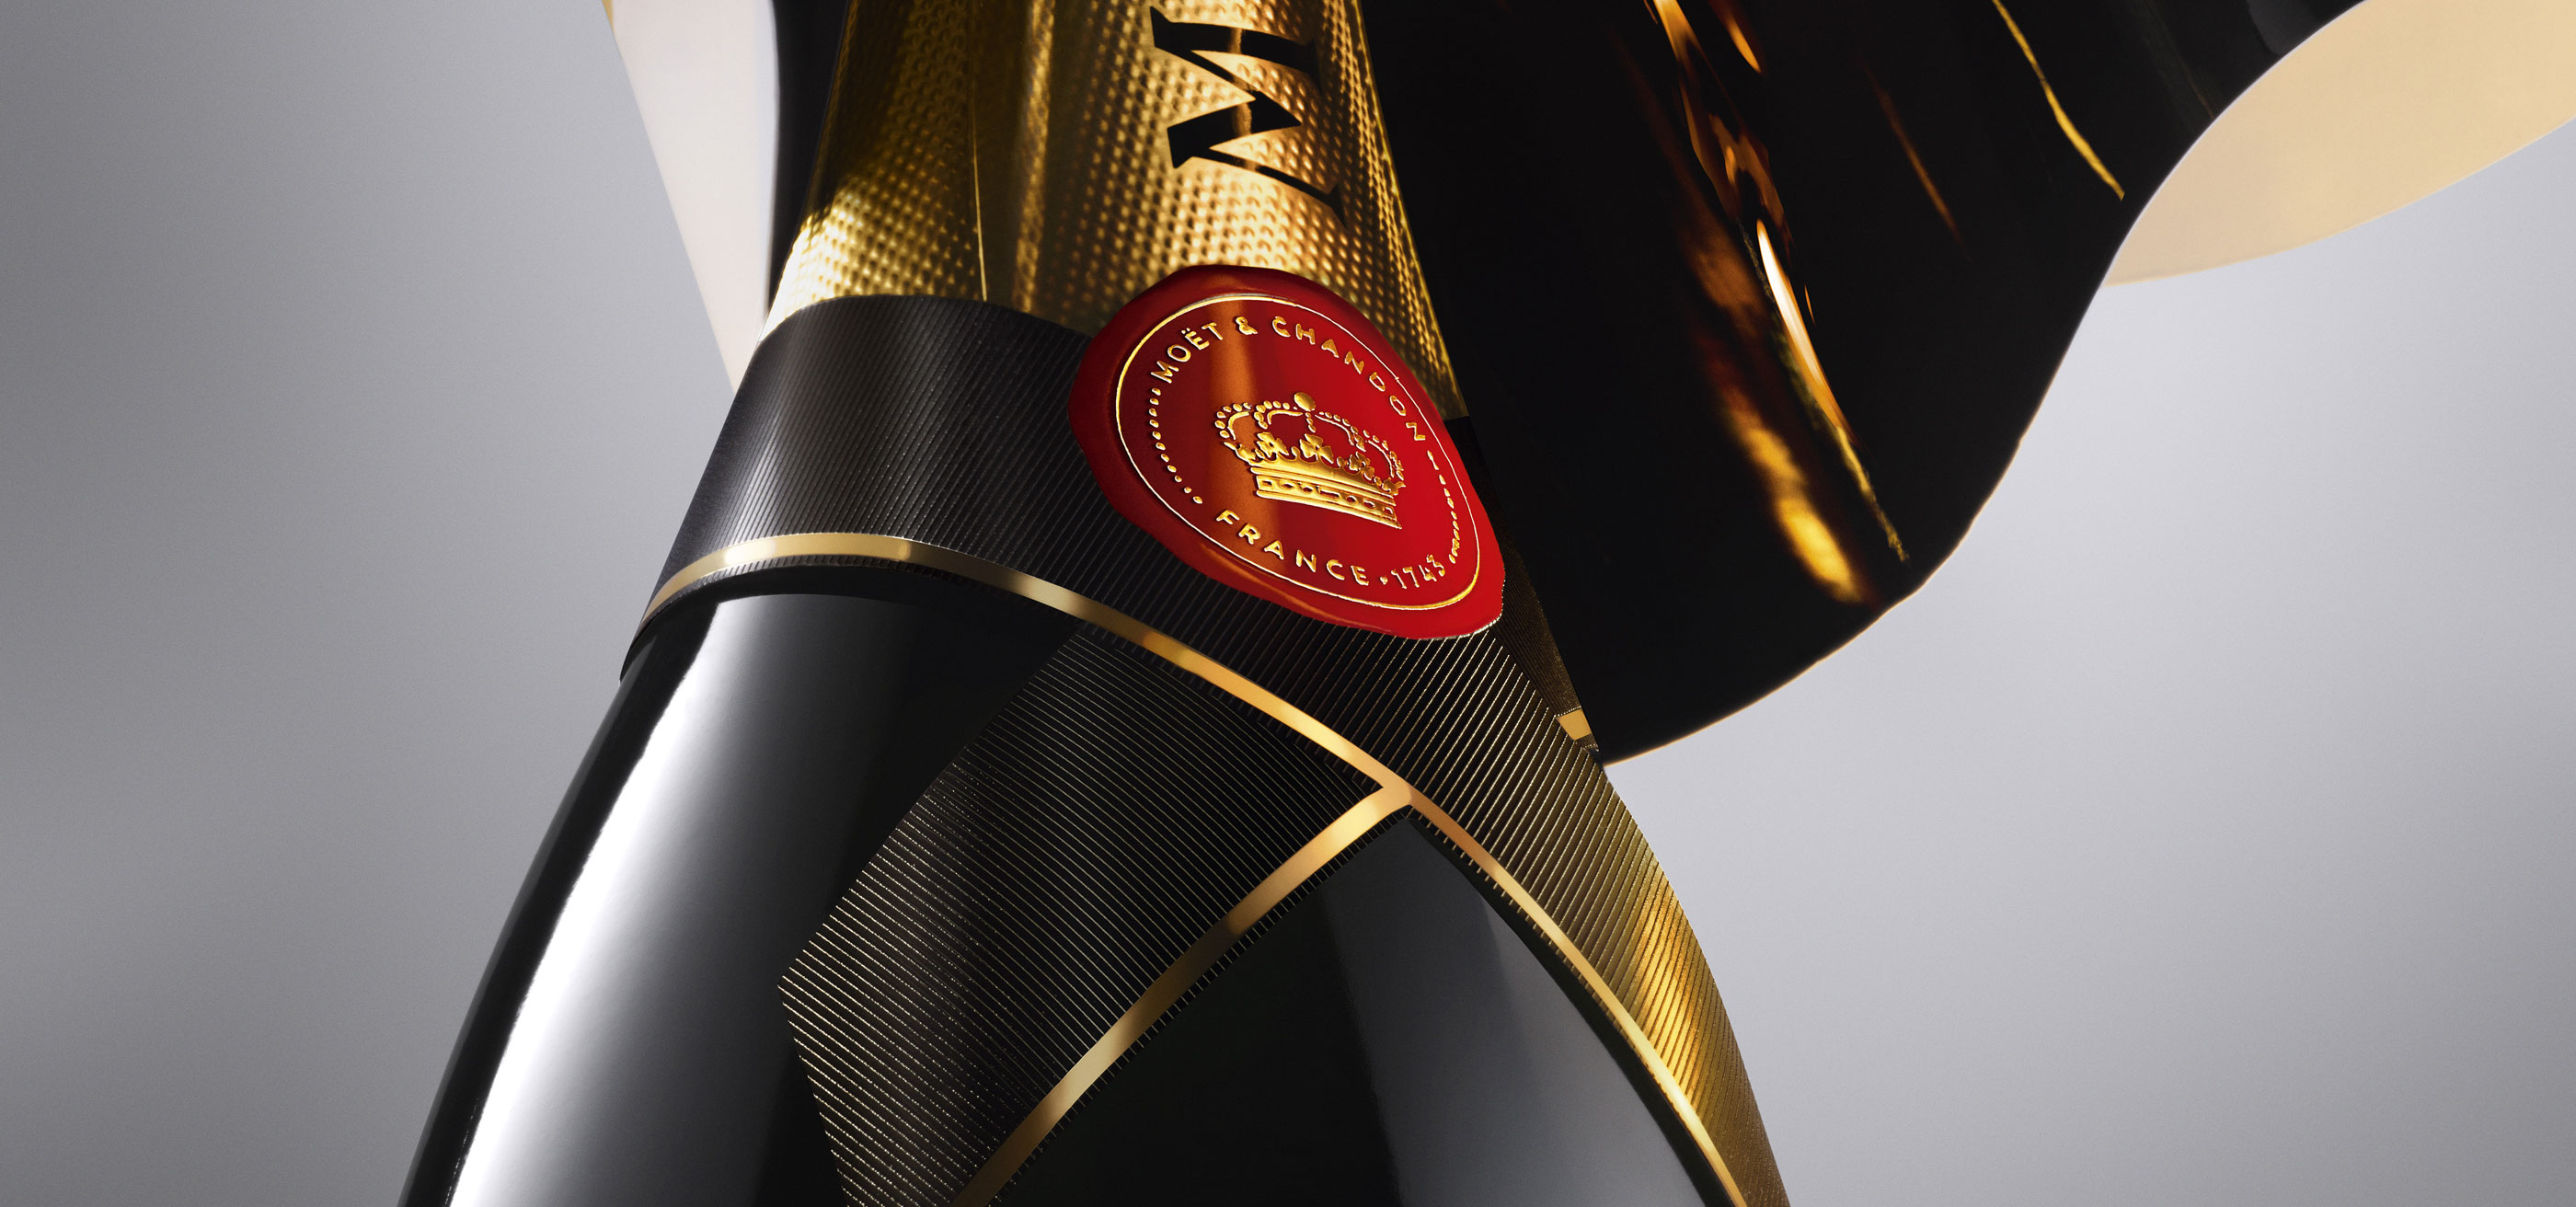 Collection Impériale Création No. 1: an expression of Moët & Chandon's  founding approach